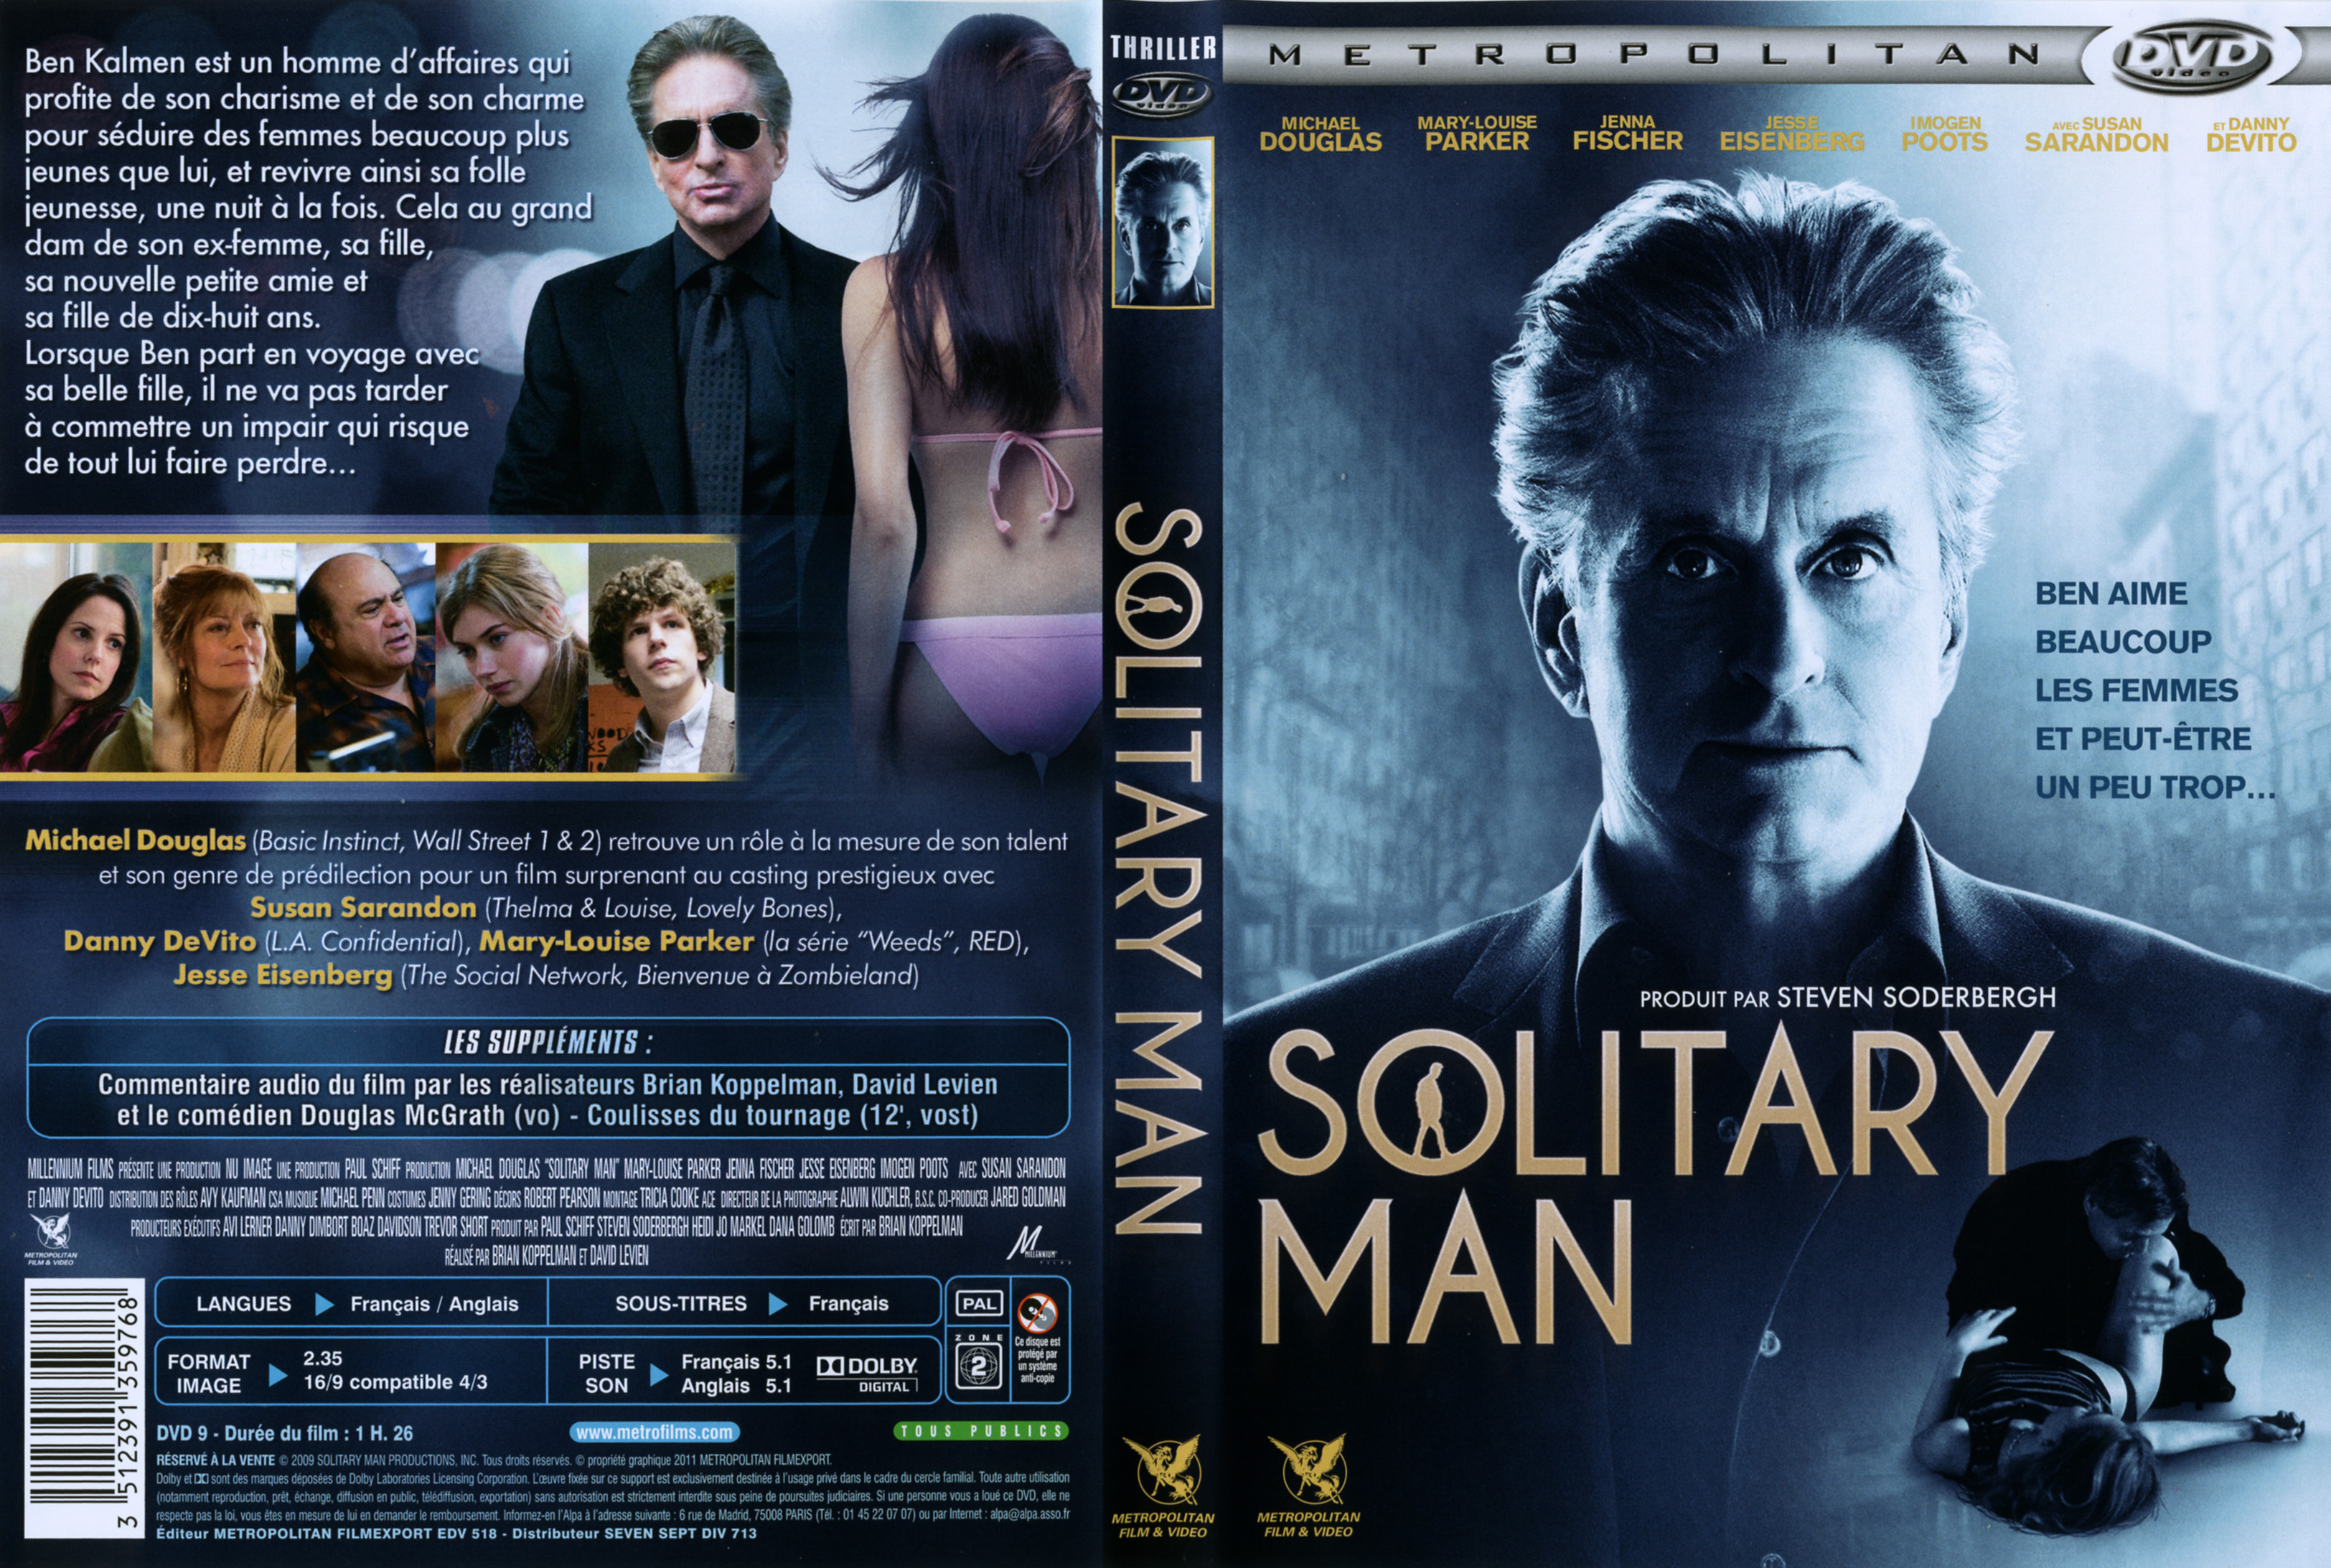 Jaquette DVD Solitary Man